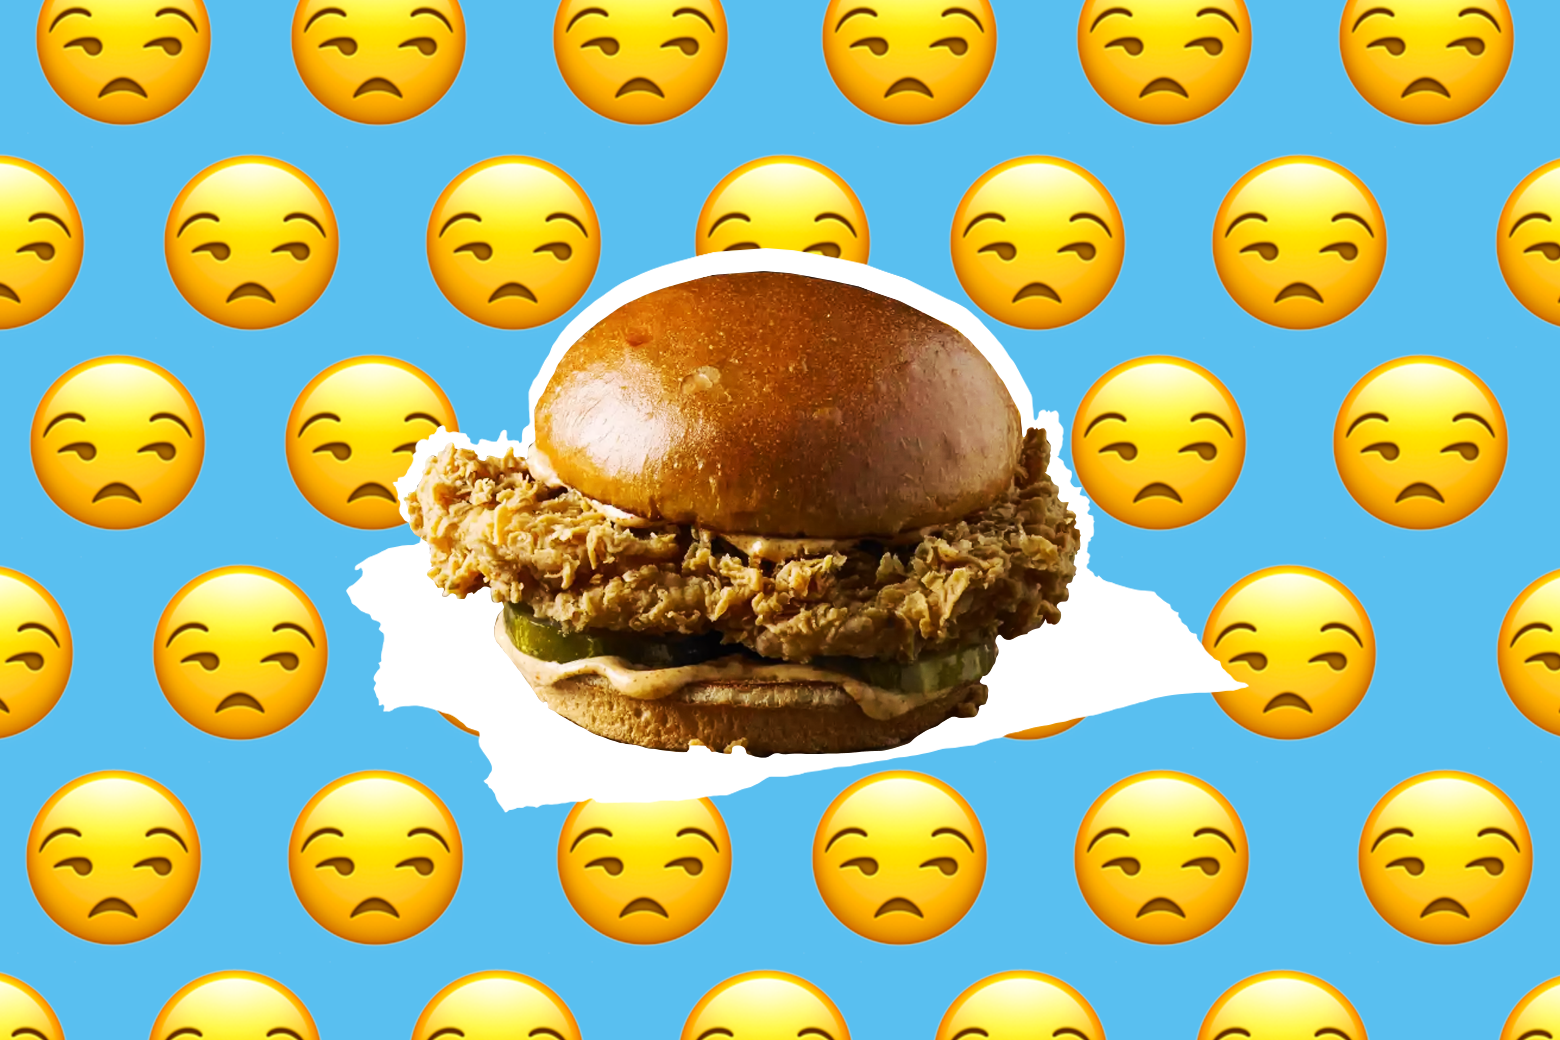 Photo illustration of the Popeyes chicken sandwich surrounded by the "unamused" emoji.